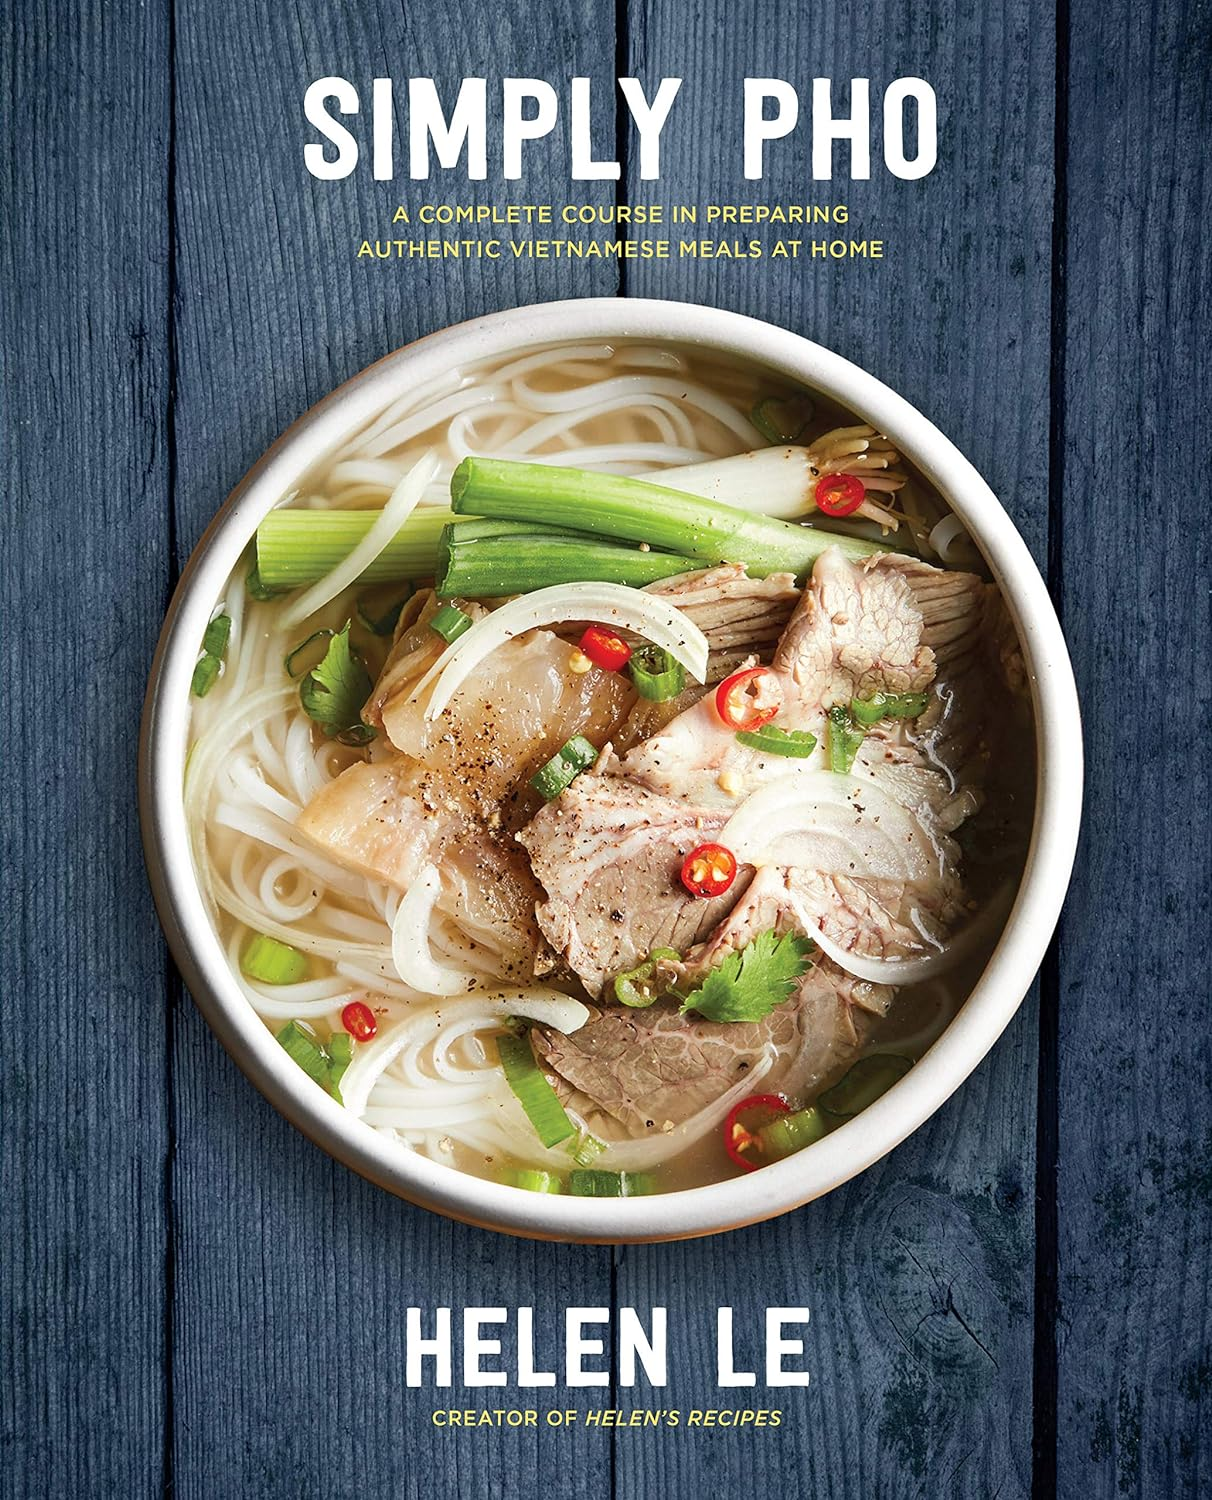 Simply Pho: A Complete Course in Preparing Authentic Vietnamese Meals at Home (Volume 3) (Simply ..., 3)